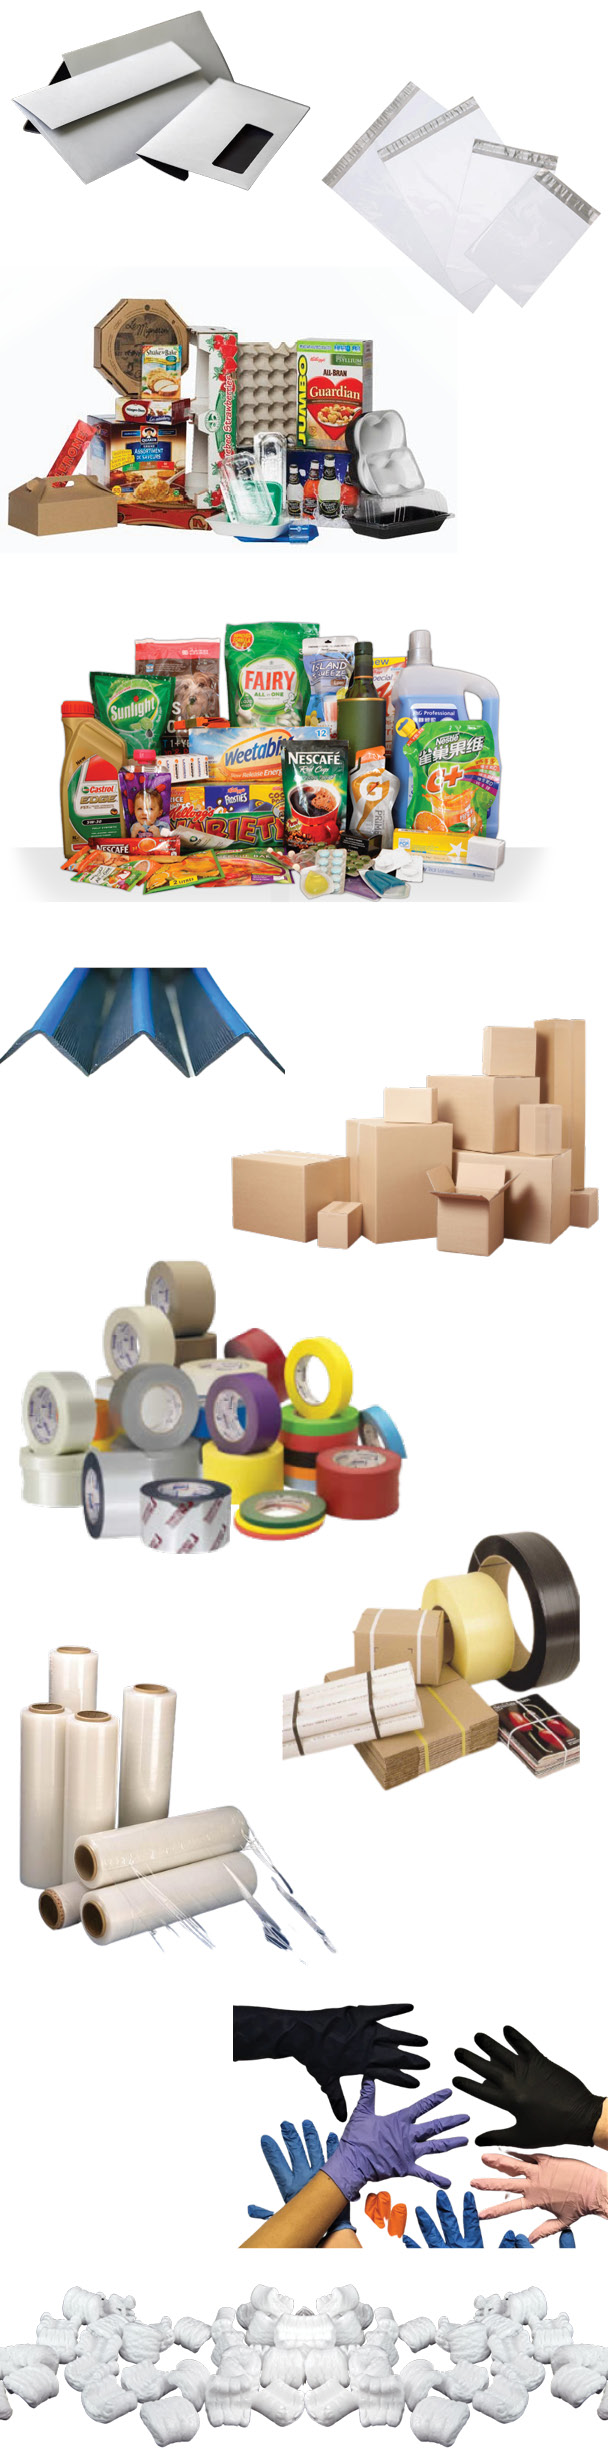 Packaging materials, including envelopes, boxes, aluminum, tape, gloves, and popcorn material.